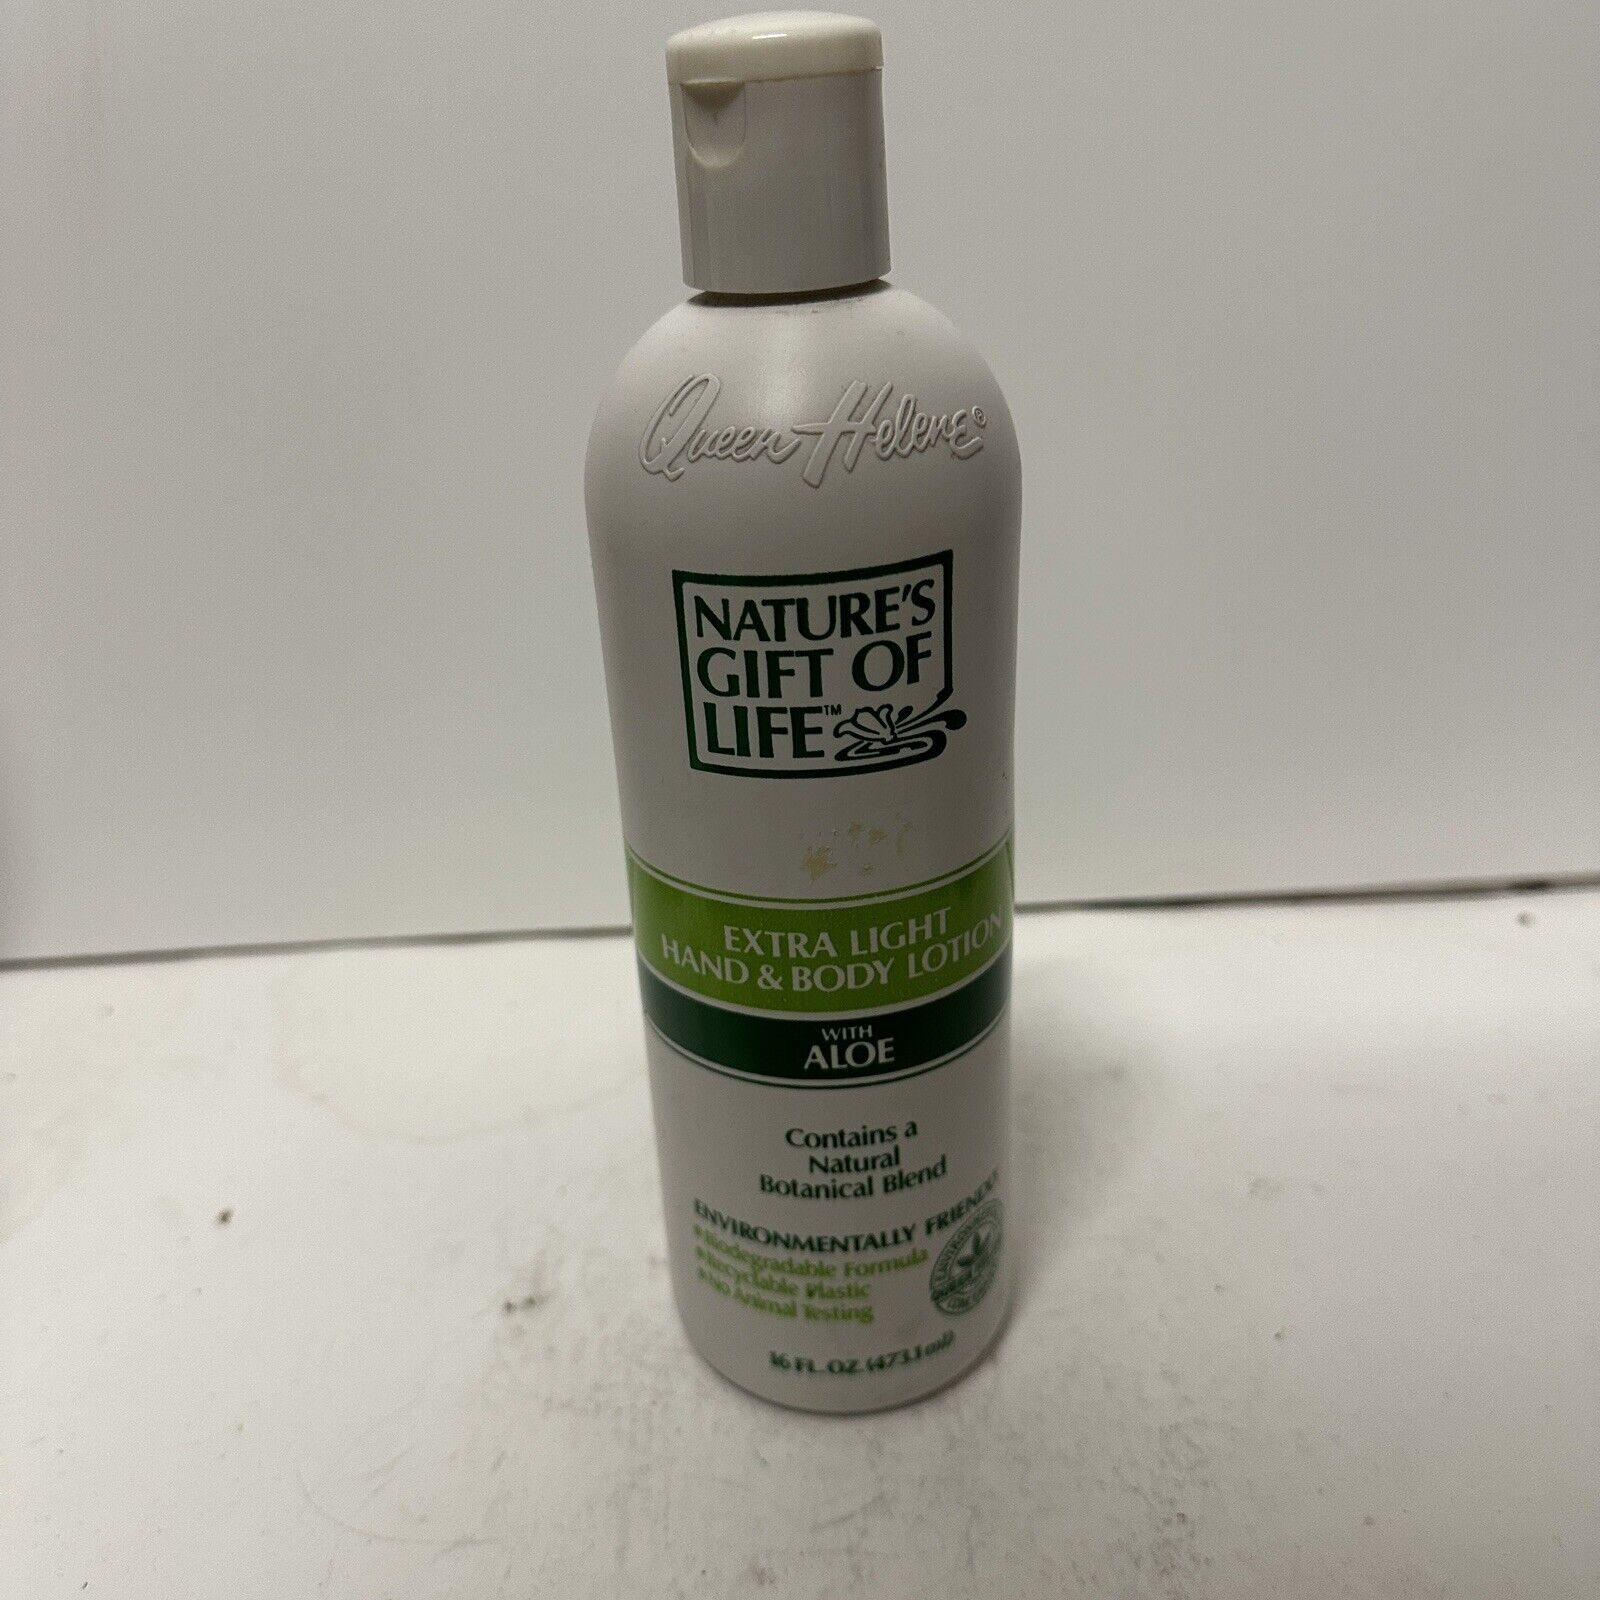 Queen Helene Natures Gift of Life Extra Light Hand and Body Lotion 16 OZ HTF